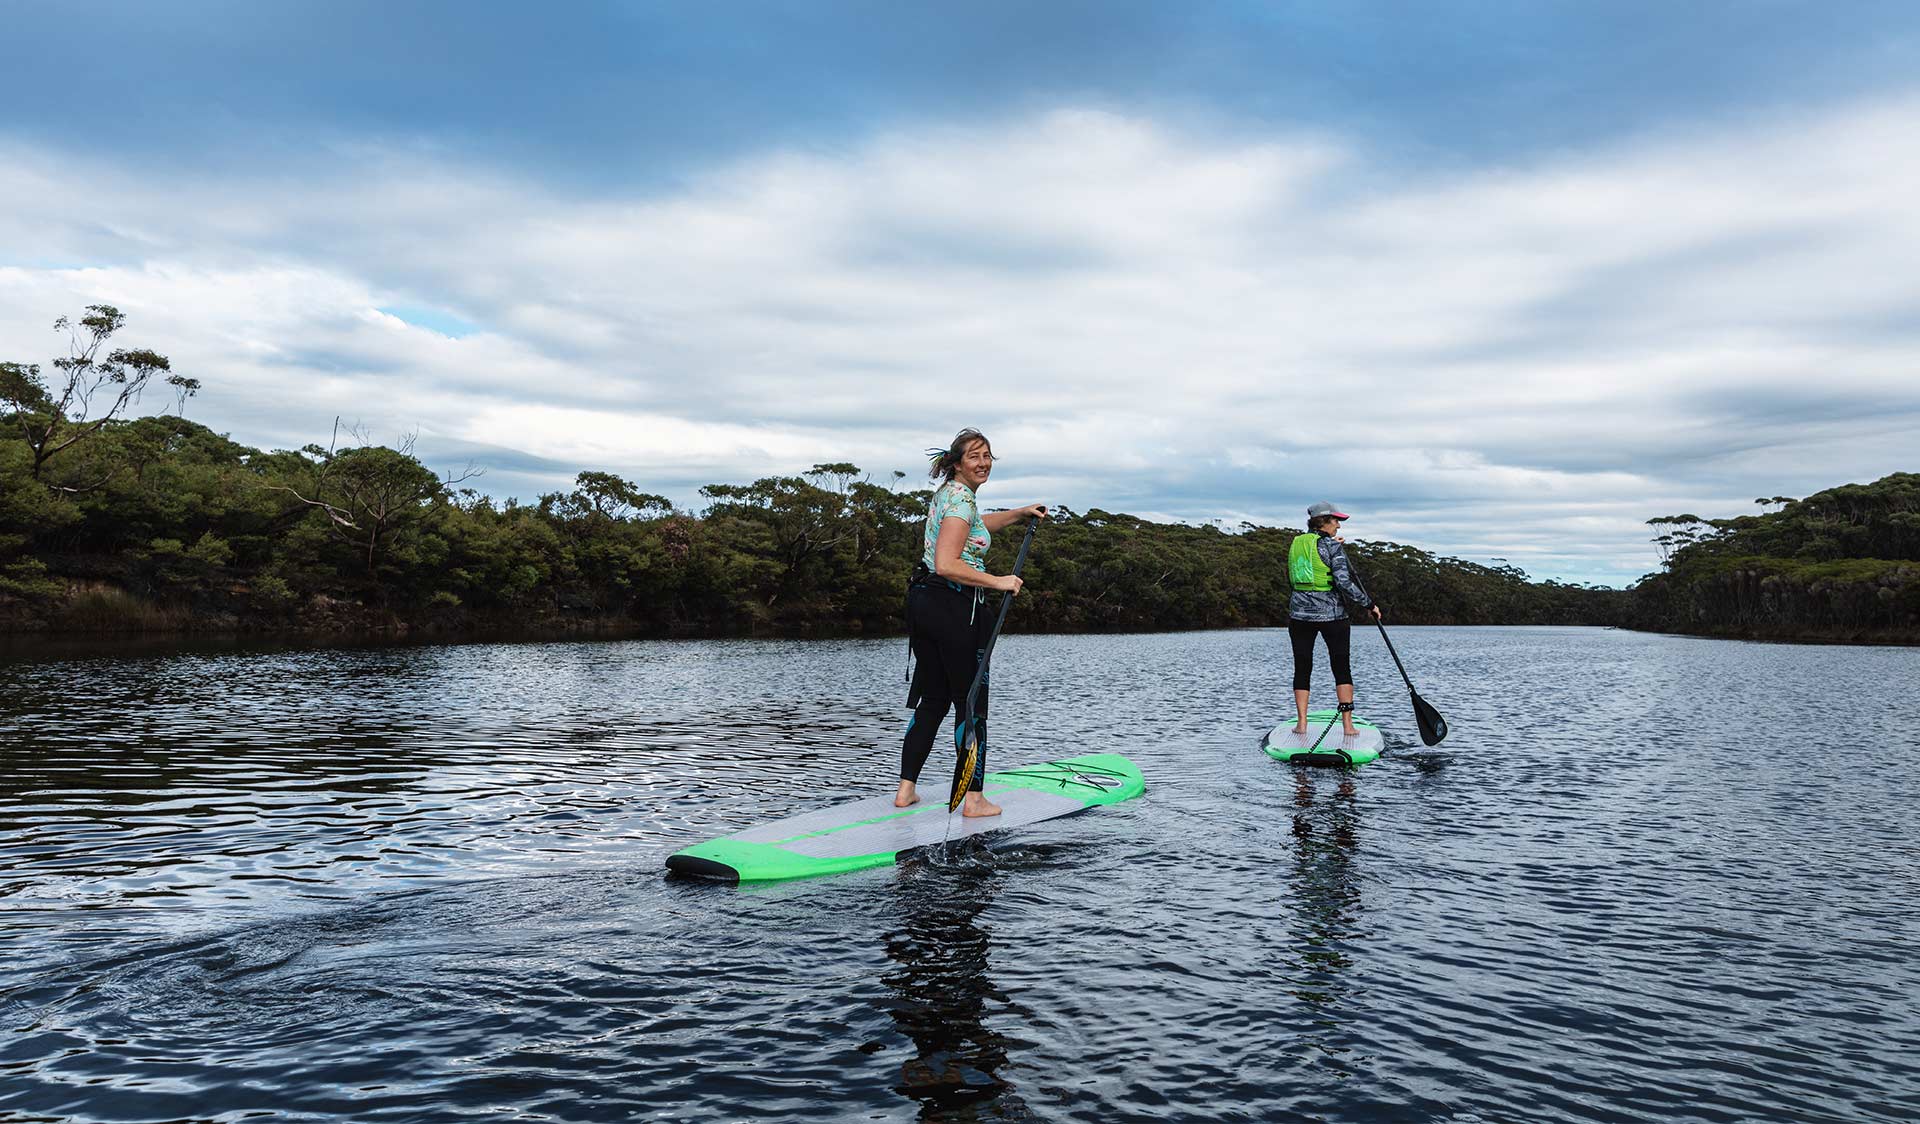 Two women stand-up paddle boarders paddle up the Yeerung River.